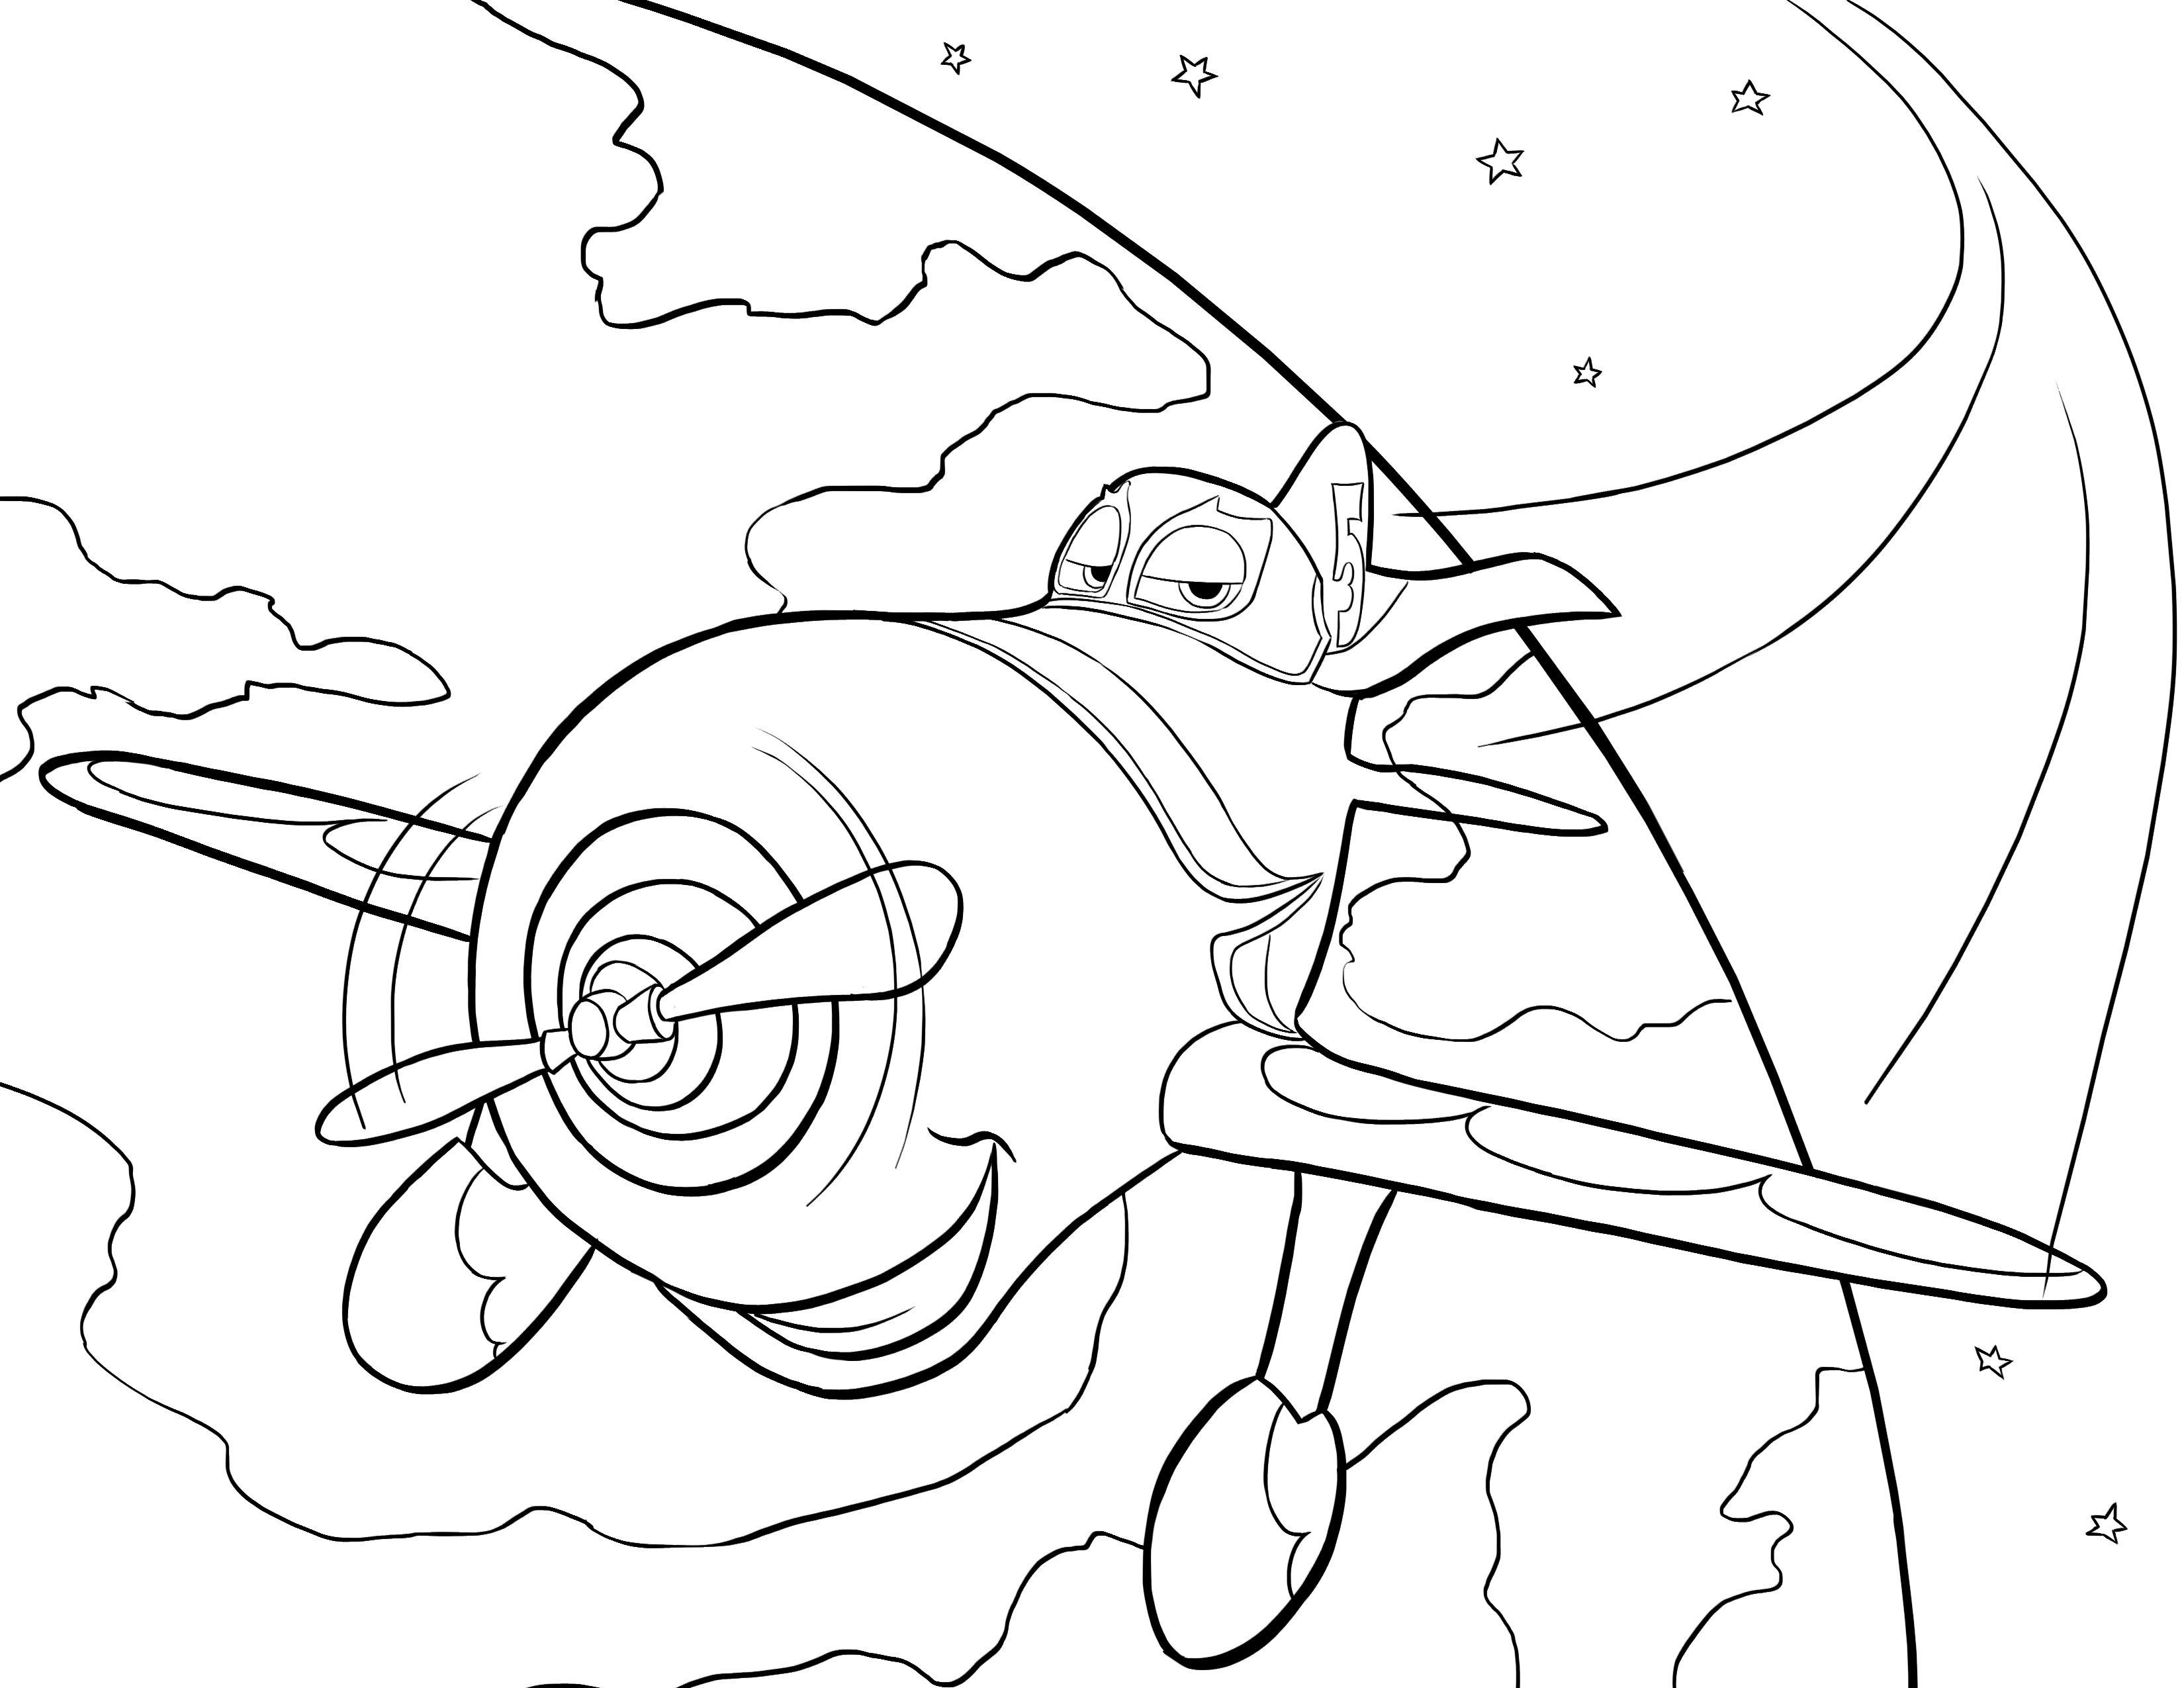 Download Planes Coloring Pages - Best Coloring Pages For Kids